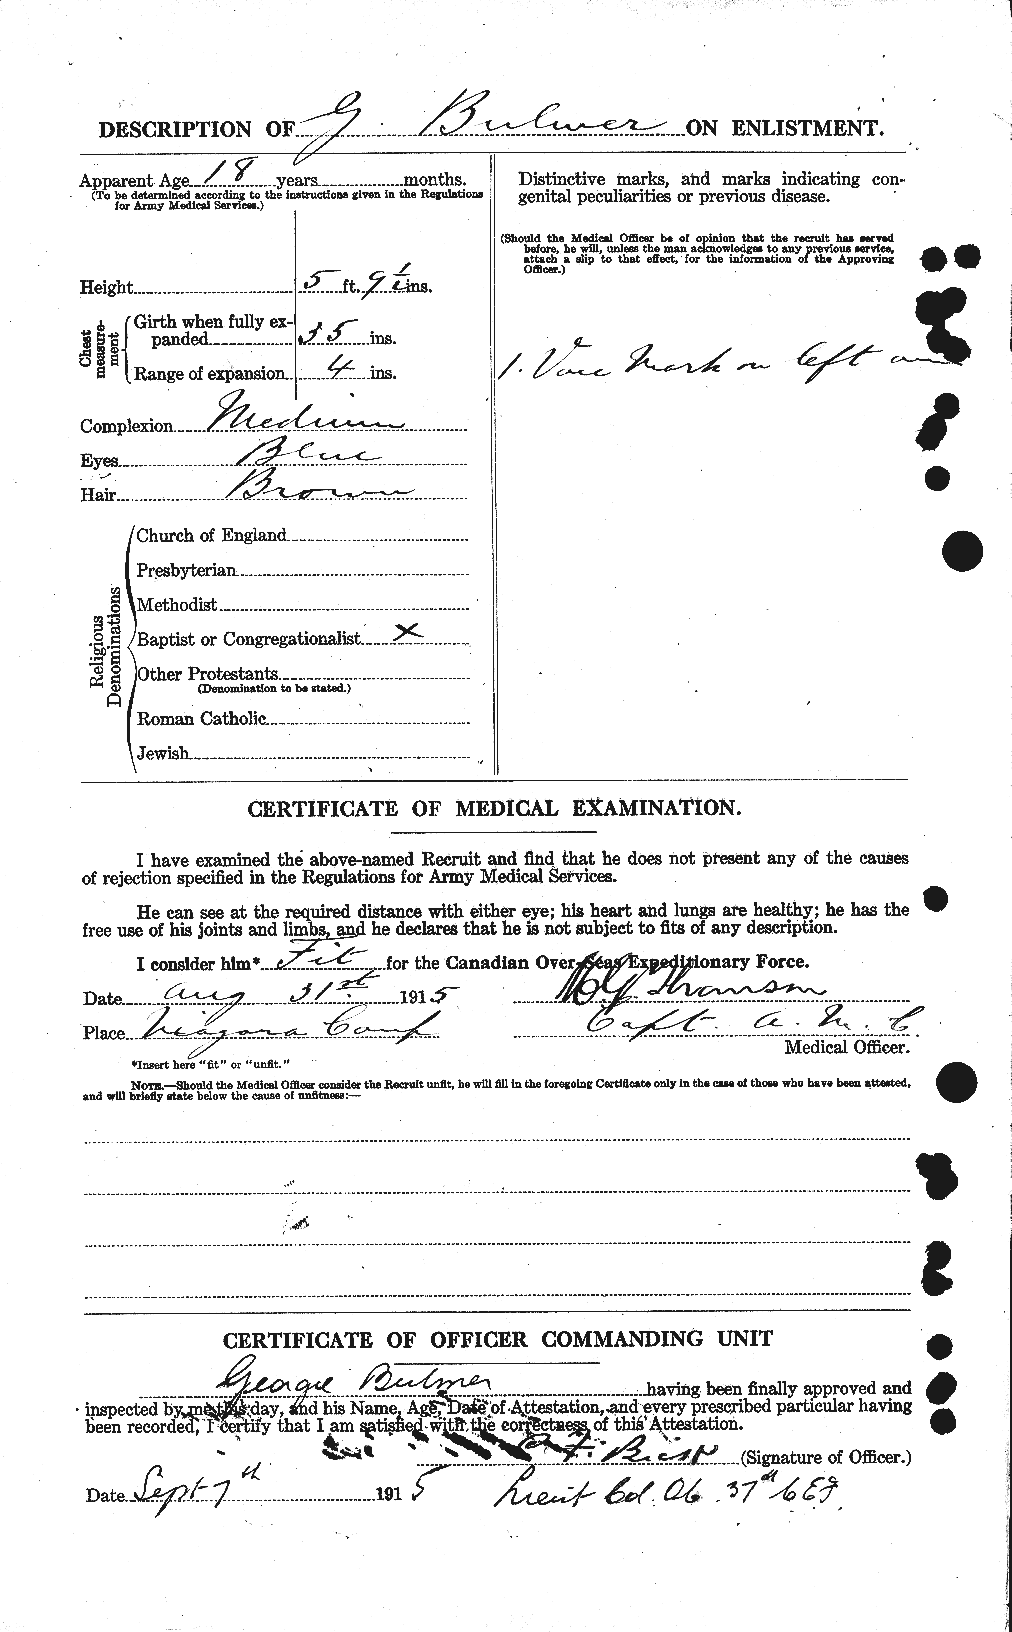 Personnel Records of the First World War - CEF 269809b